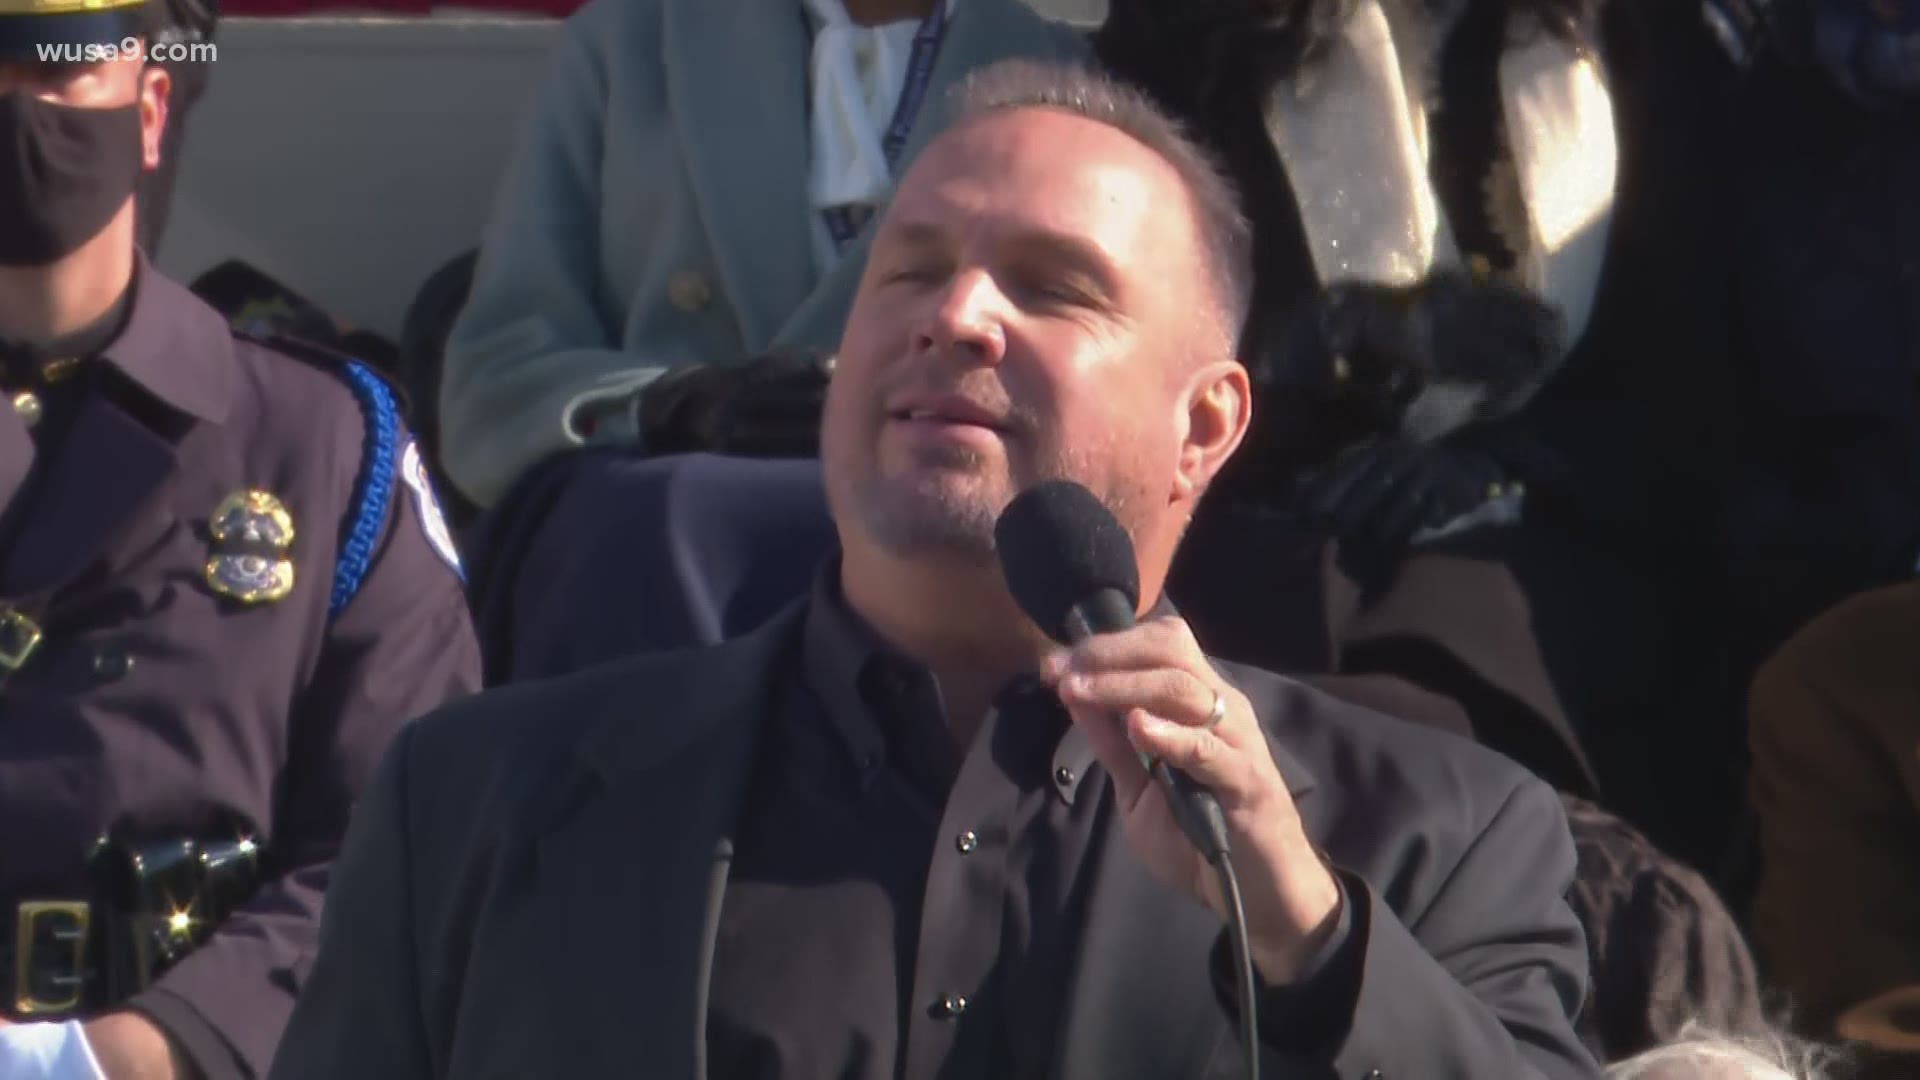 Country singer Garth Brooks performs at Joe Biden's inauguration as part of the swearing-in ceremony at the Capitol .